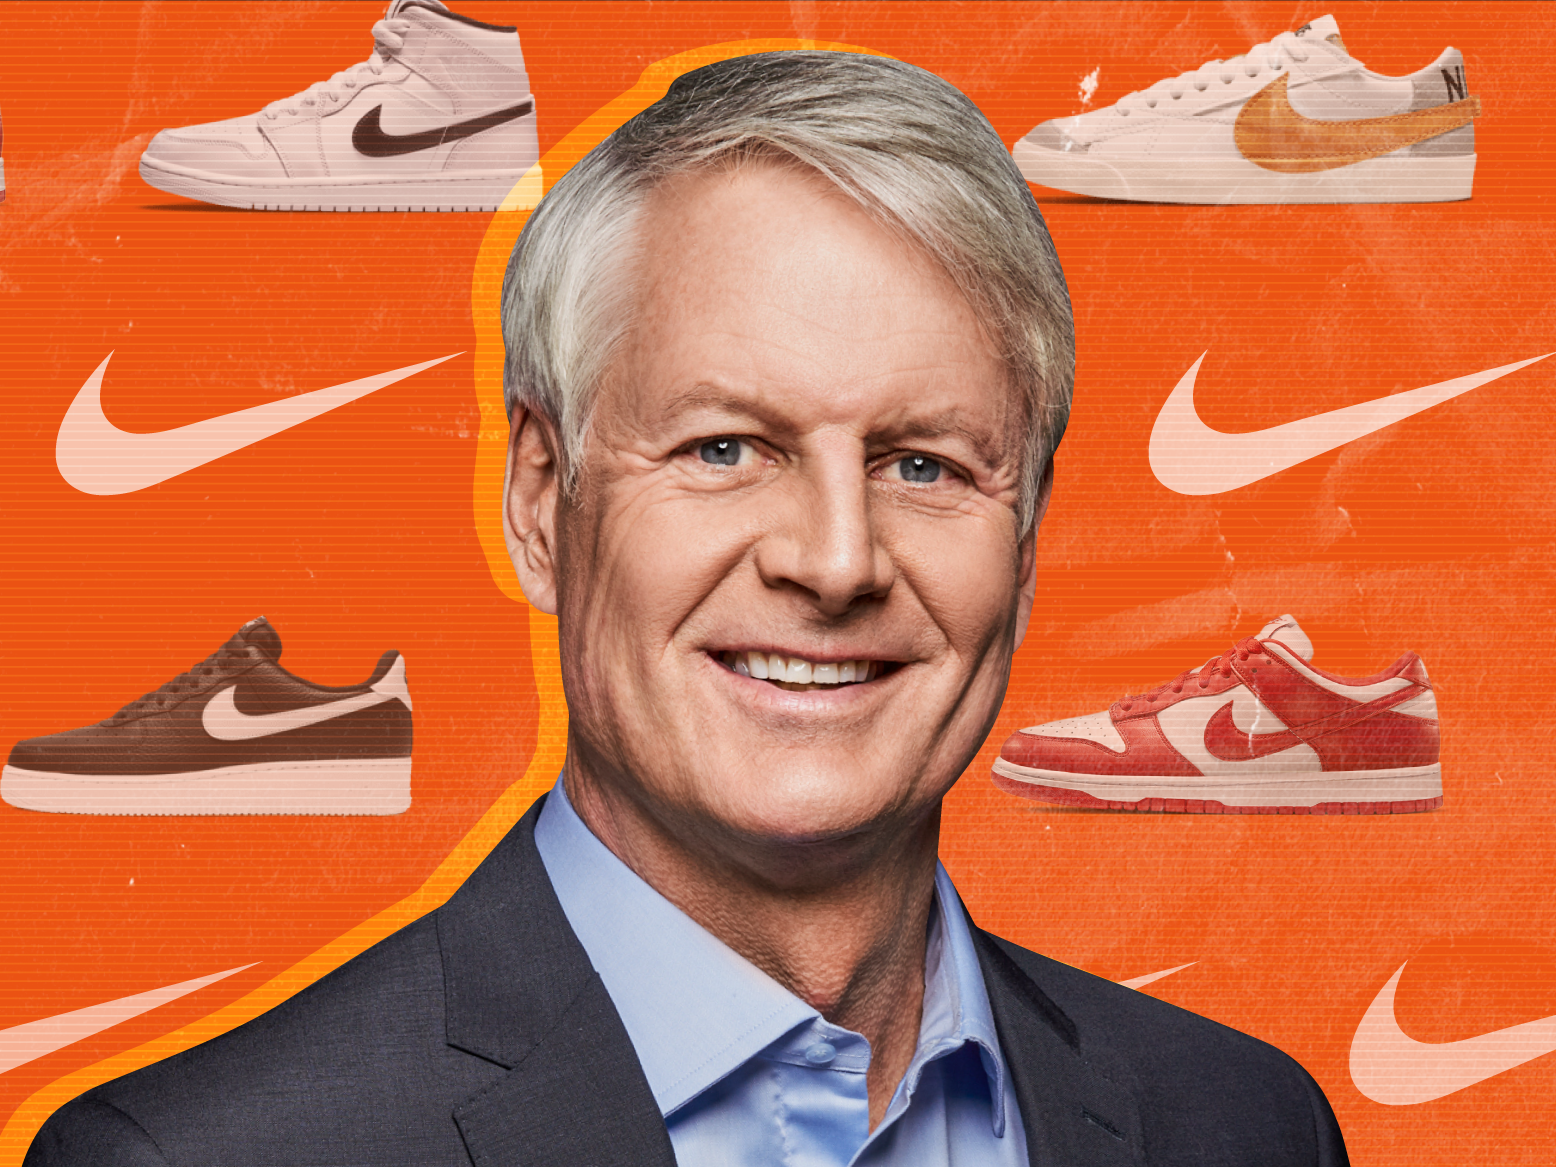 Nike CEO John Donahoe in front of pattern of Nike sneakers and logo 2x1